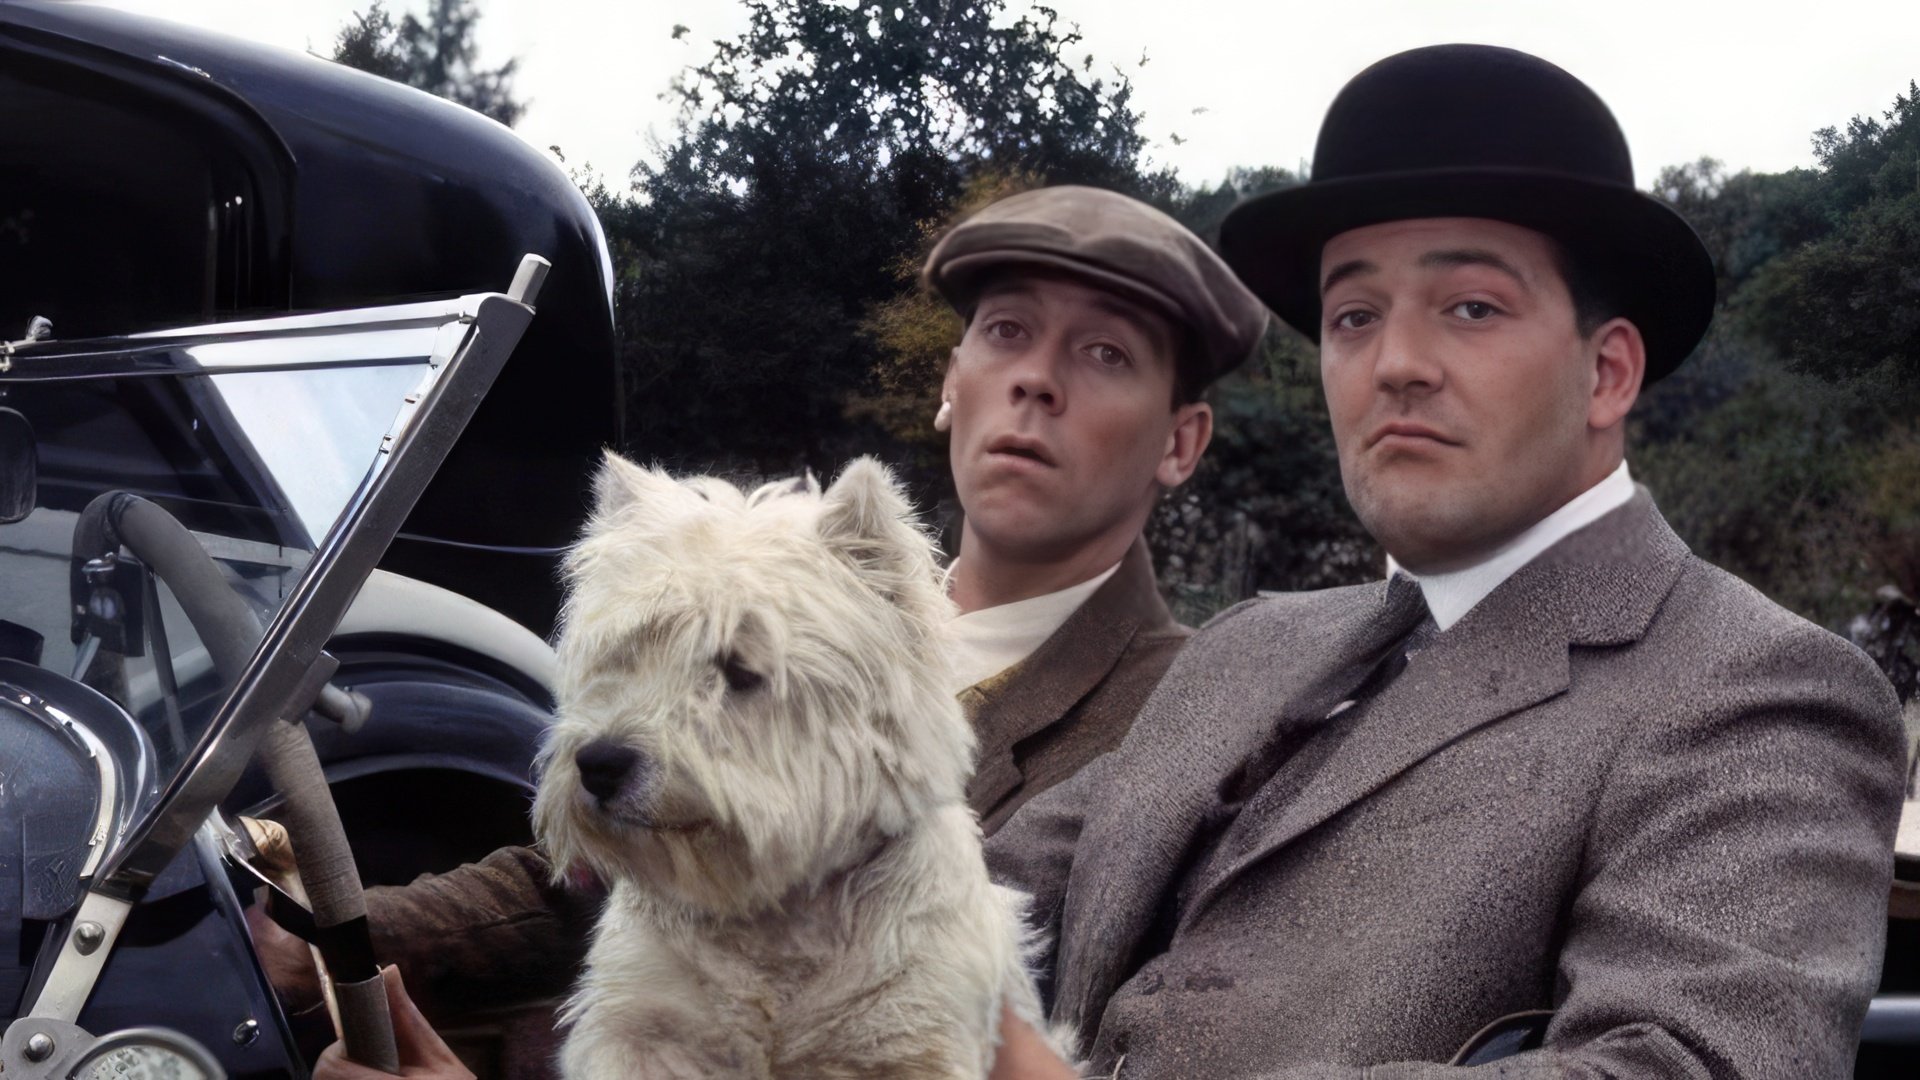 Stephen Fry and Hugh Laurie in the TV series Jeeves and Wooster